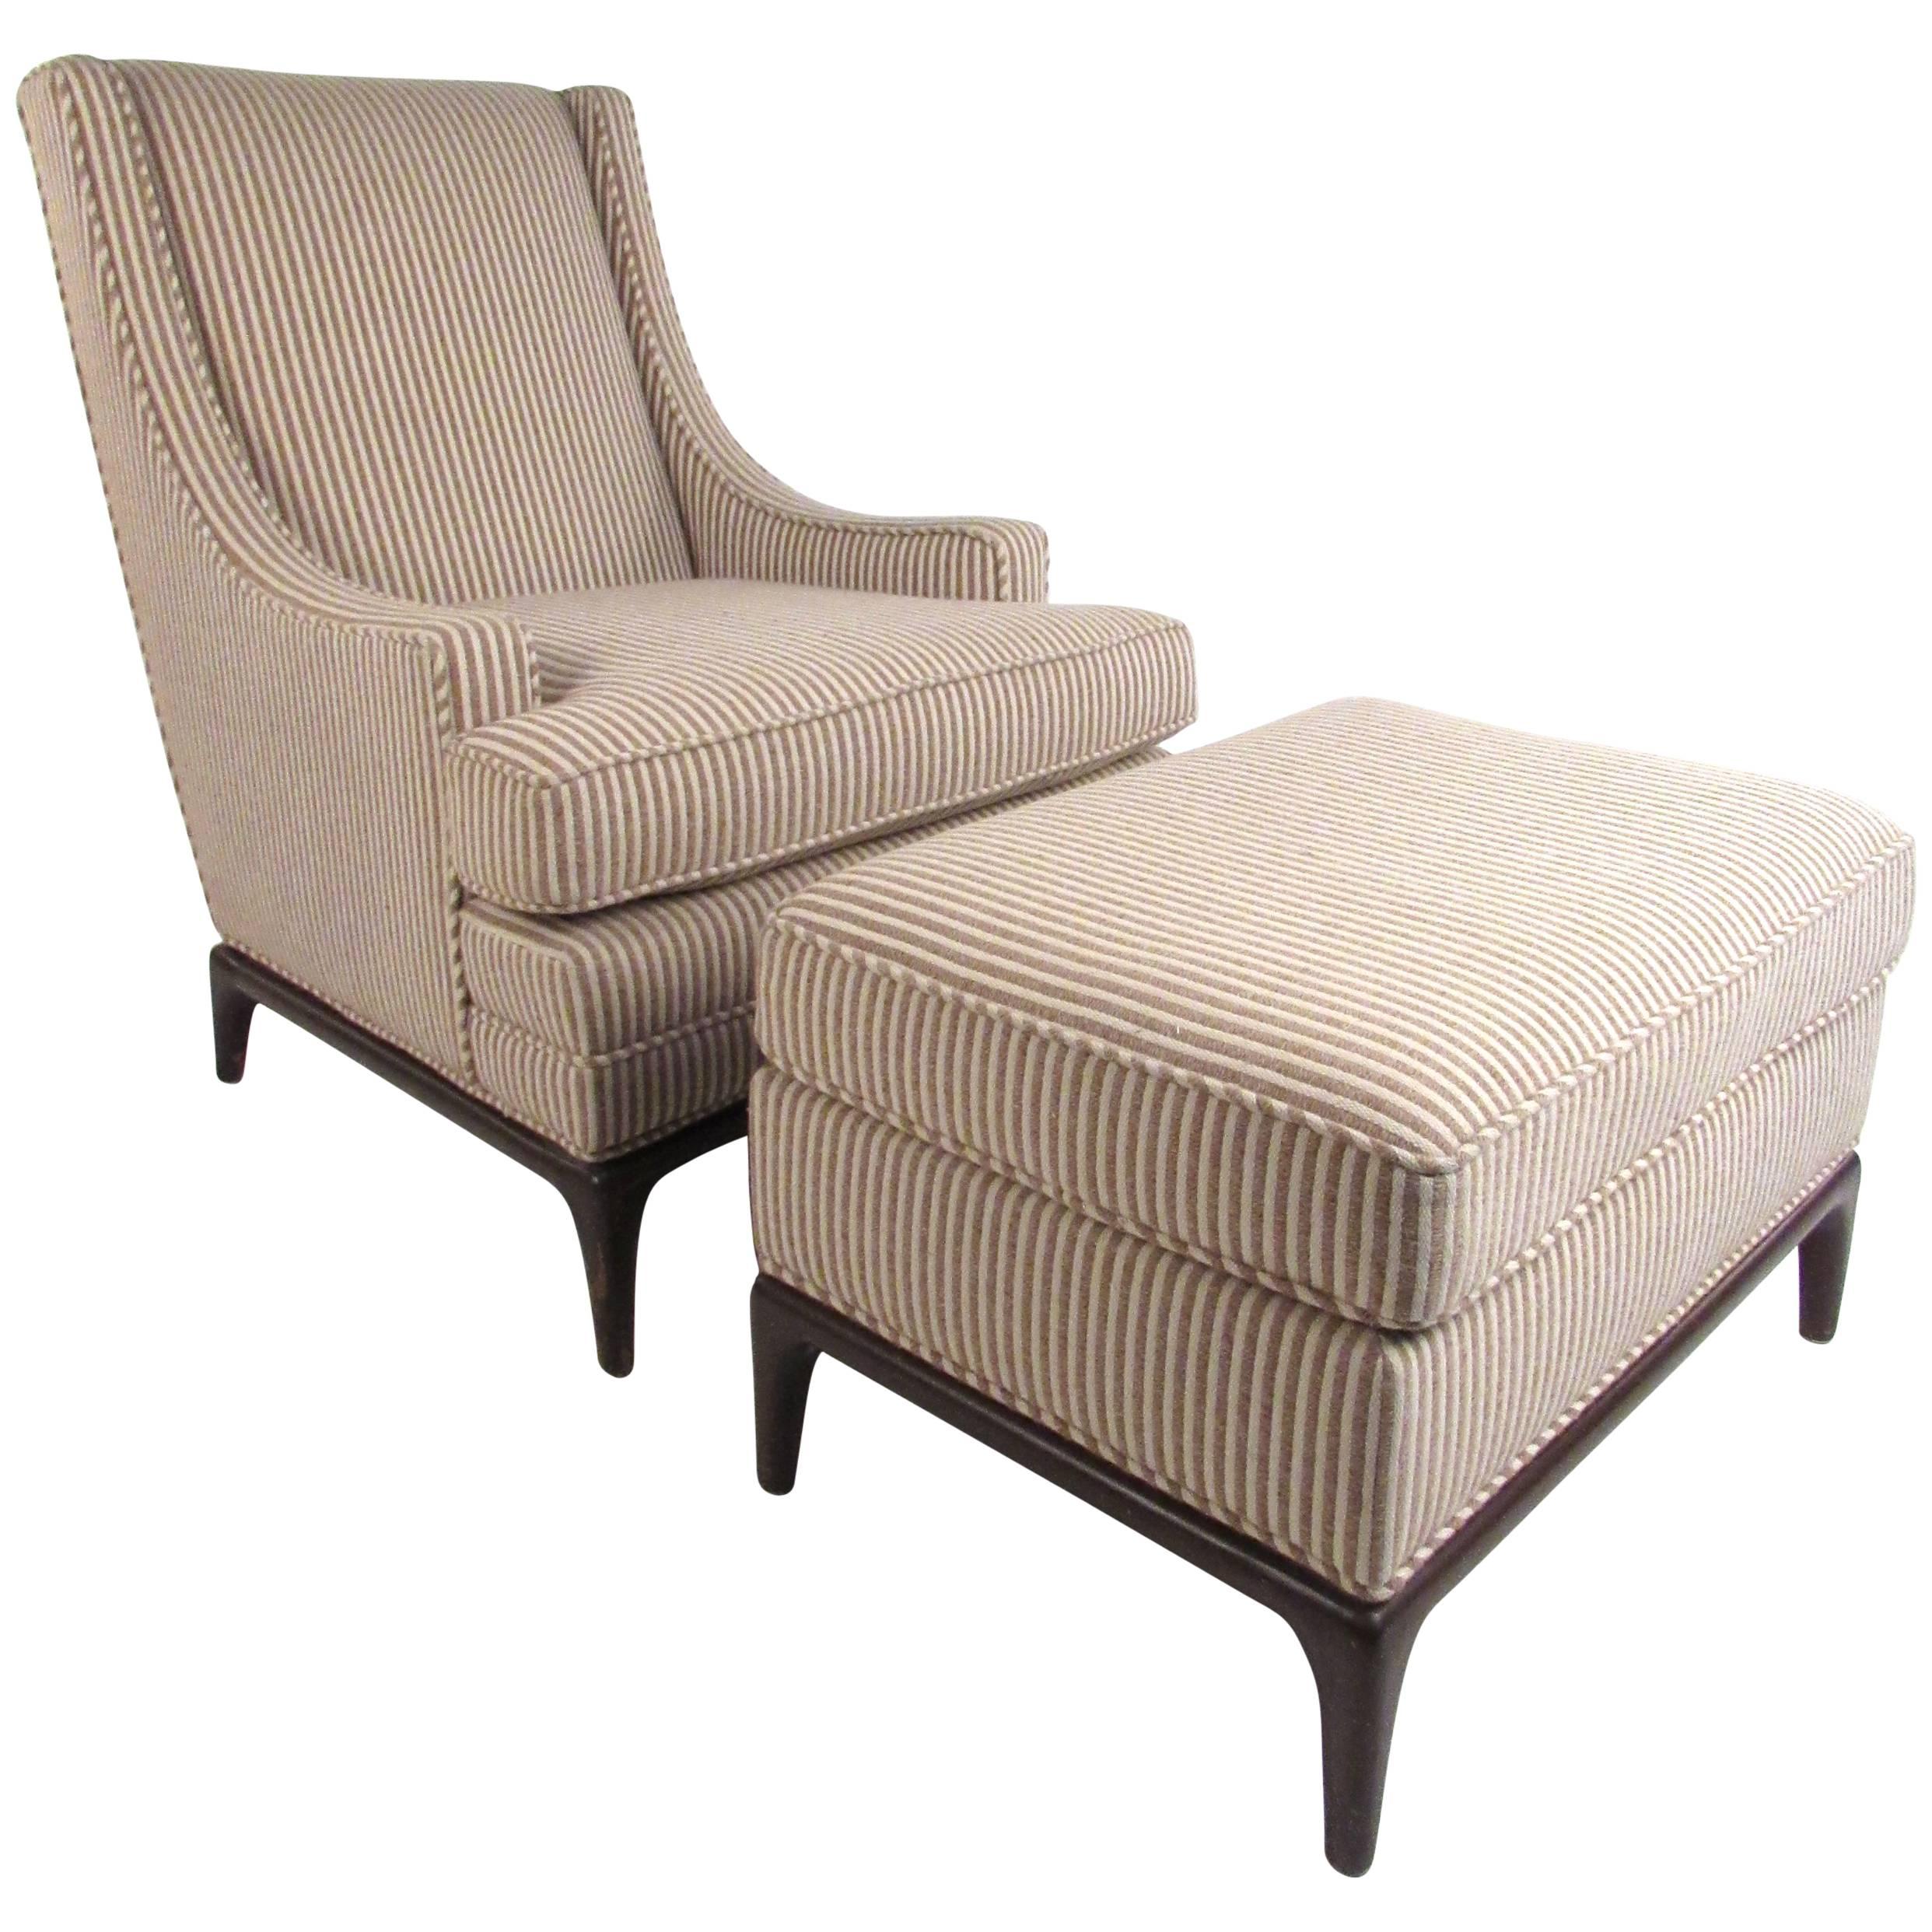 Mid-Century Modern Lounge Chair with Ottoman after Robsjohn-Gibbings